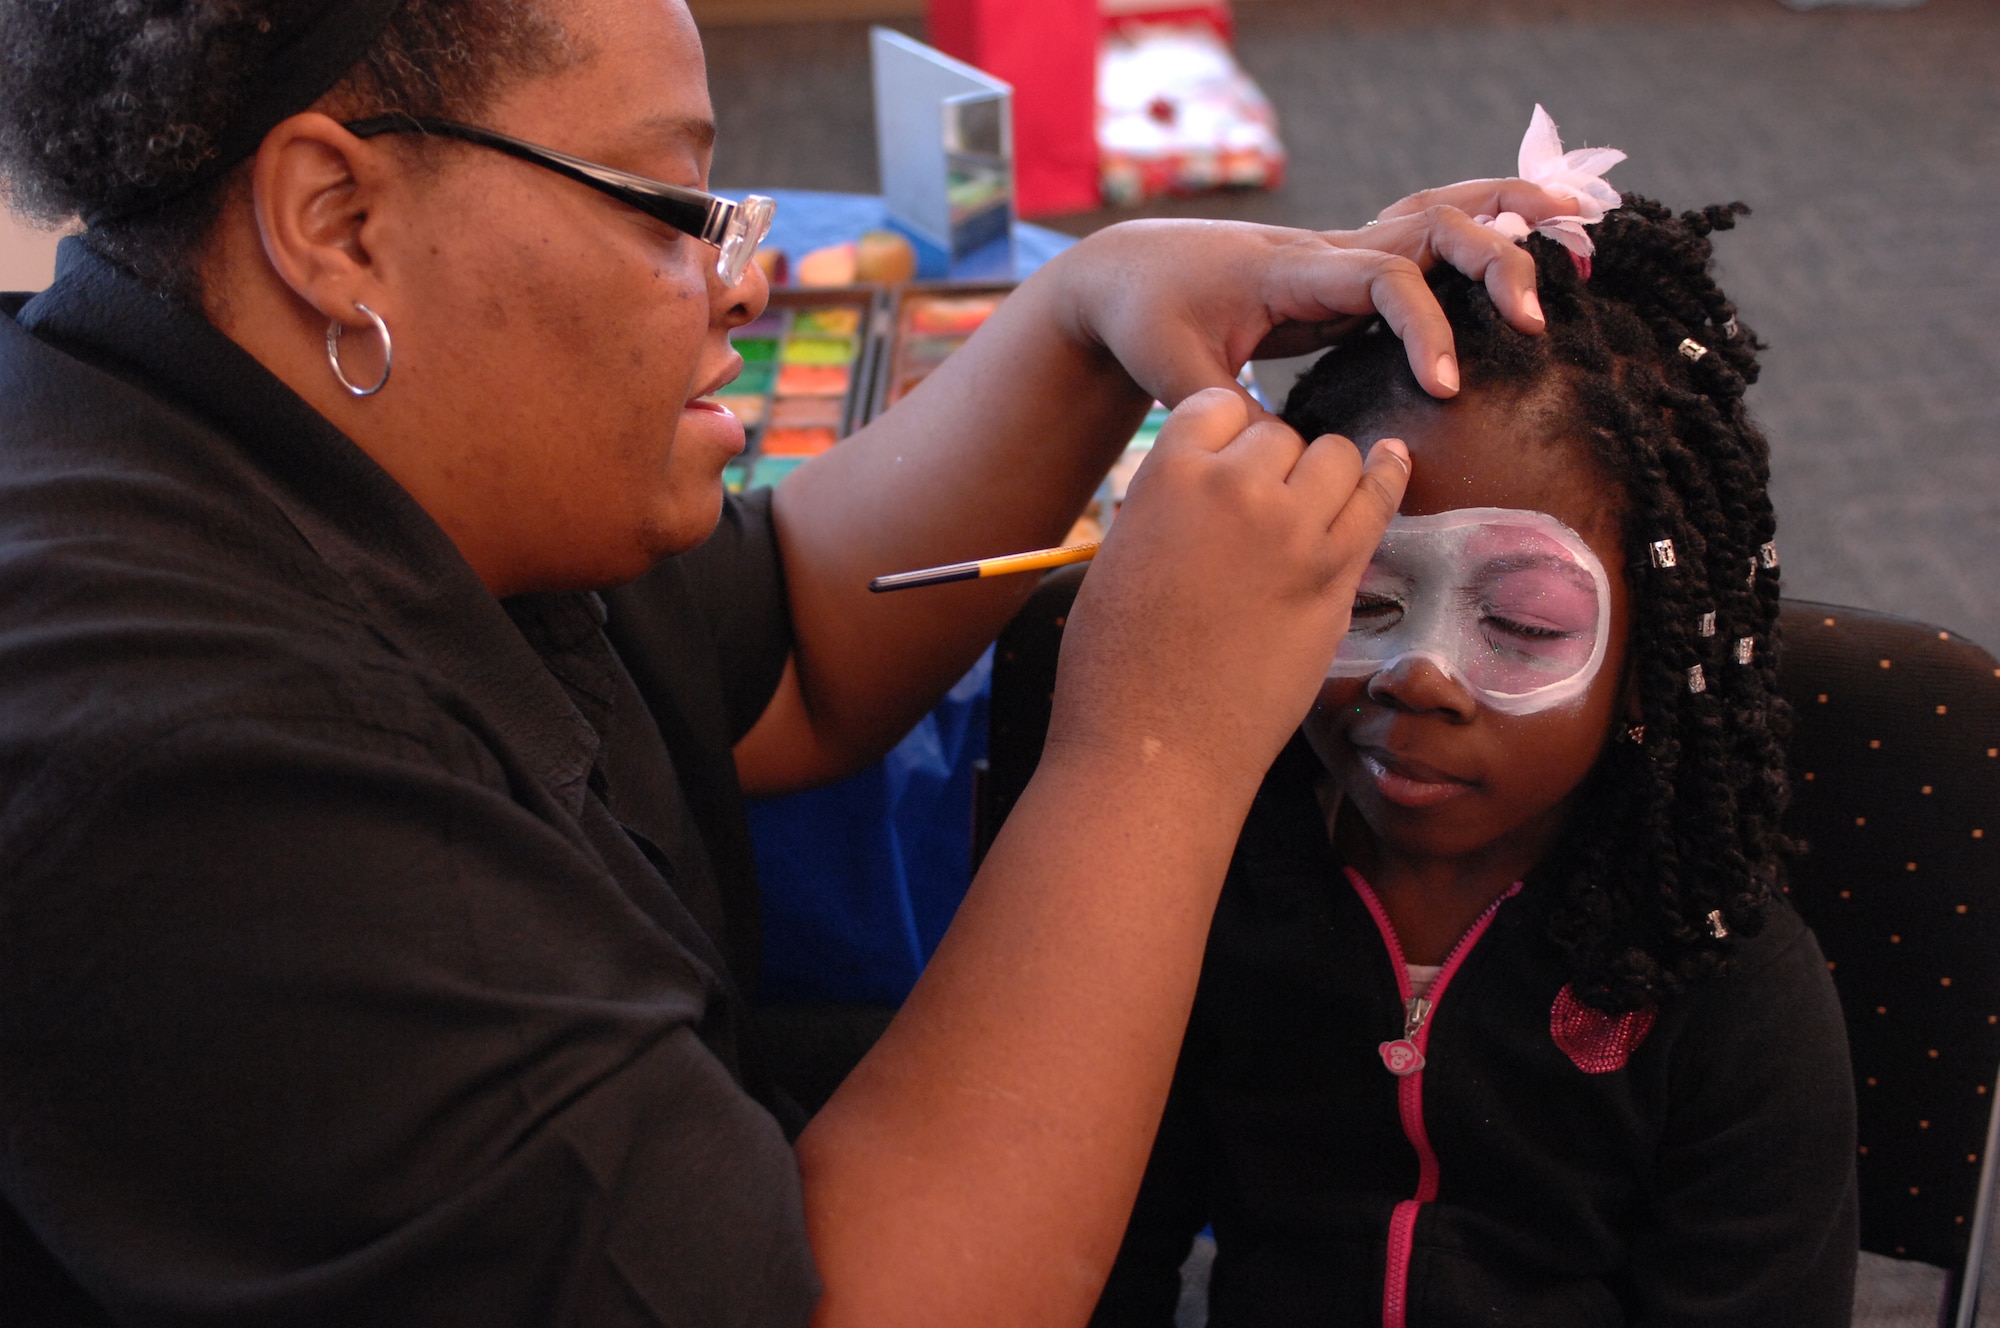 A child attending a holiday party sponsored by the Reconnaissance Crews Booster Club squints as her face is painted at the Pointe at Rising View, Offutt Air Force Base, Neb., Dec. 12, 2015. The event combined a holiday party with a shopping trip in which underprivileged children received money to spend on winter clothing and shoes. (U.S. Air Force photo/Senior Airman Rachel Hammes)